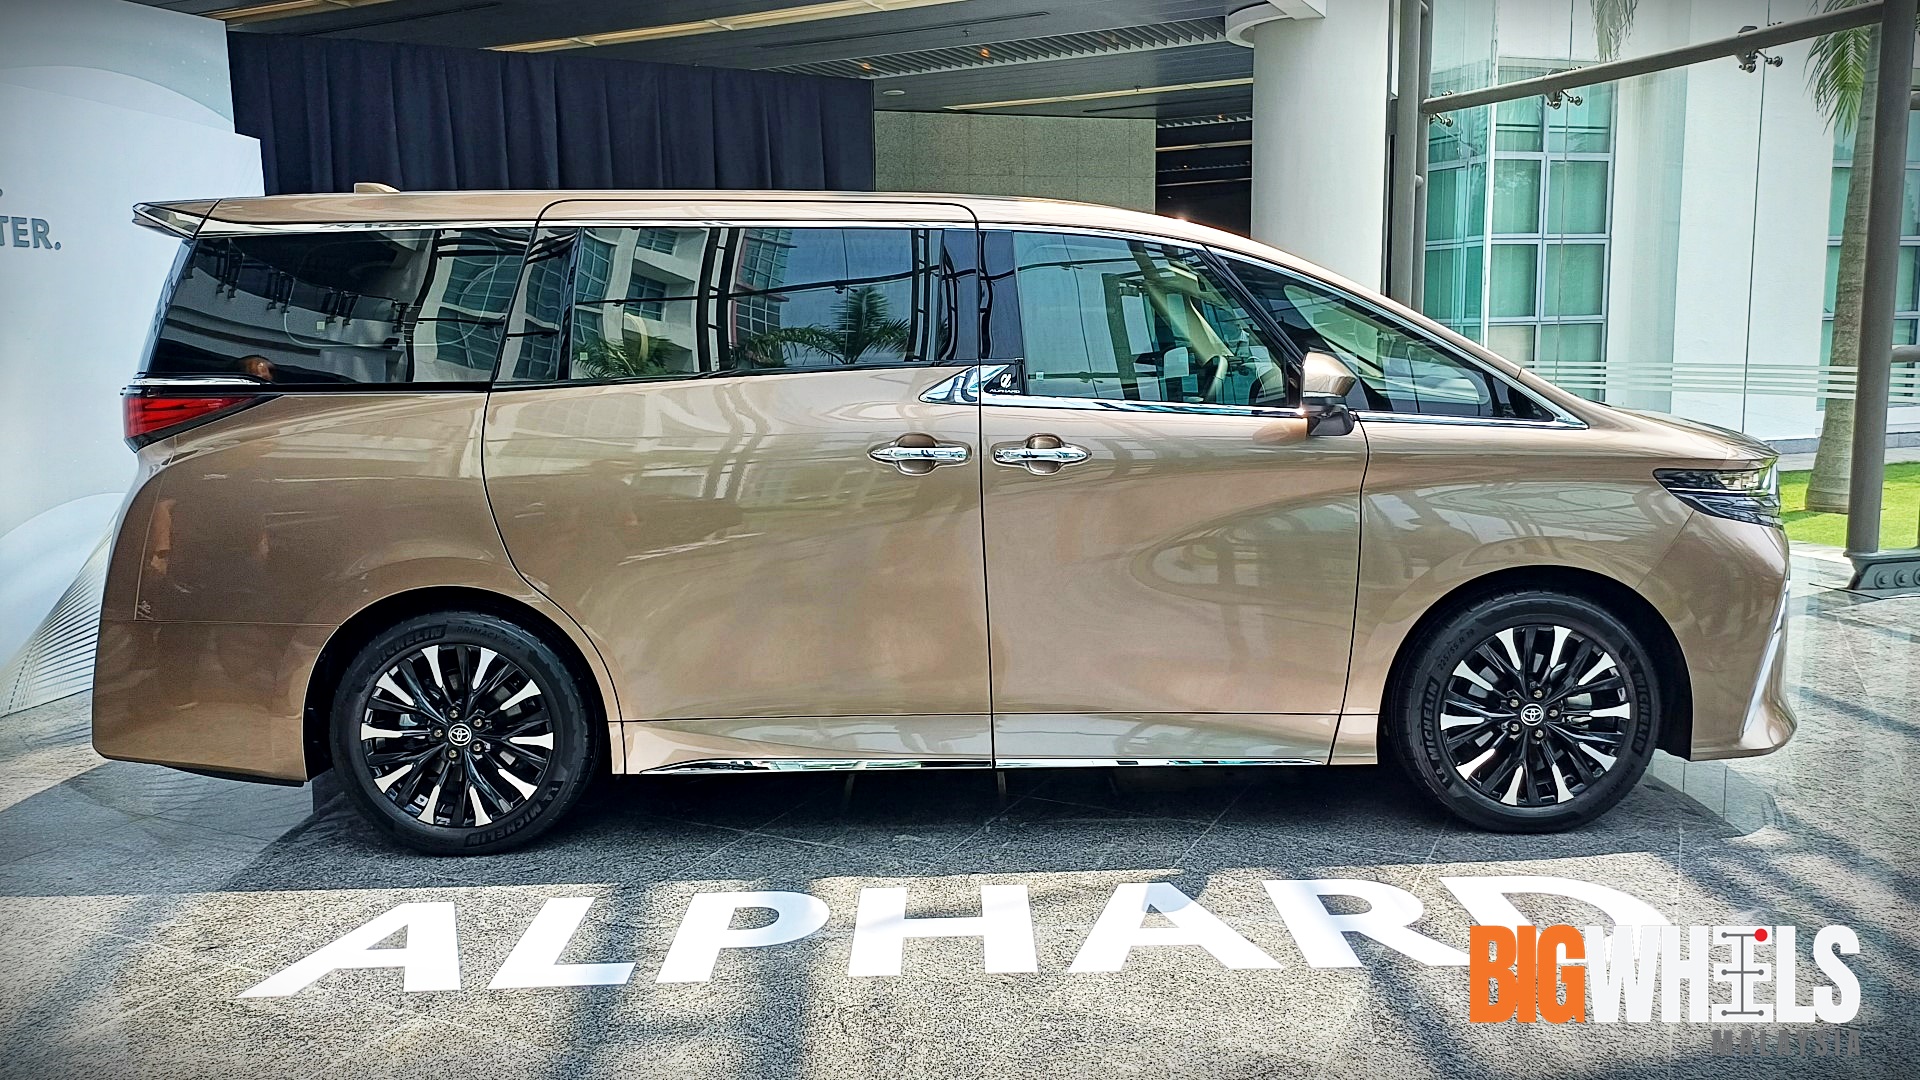 2023 Toyota Alphard, Vellfire now in Malaysia from RM438k